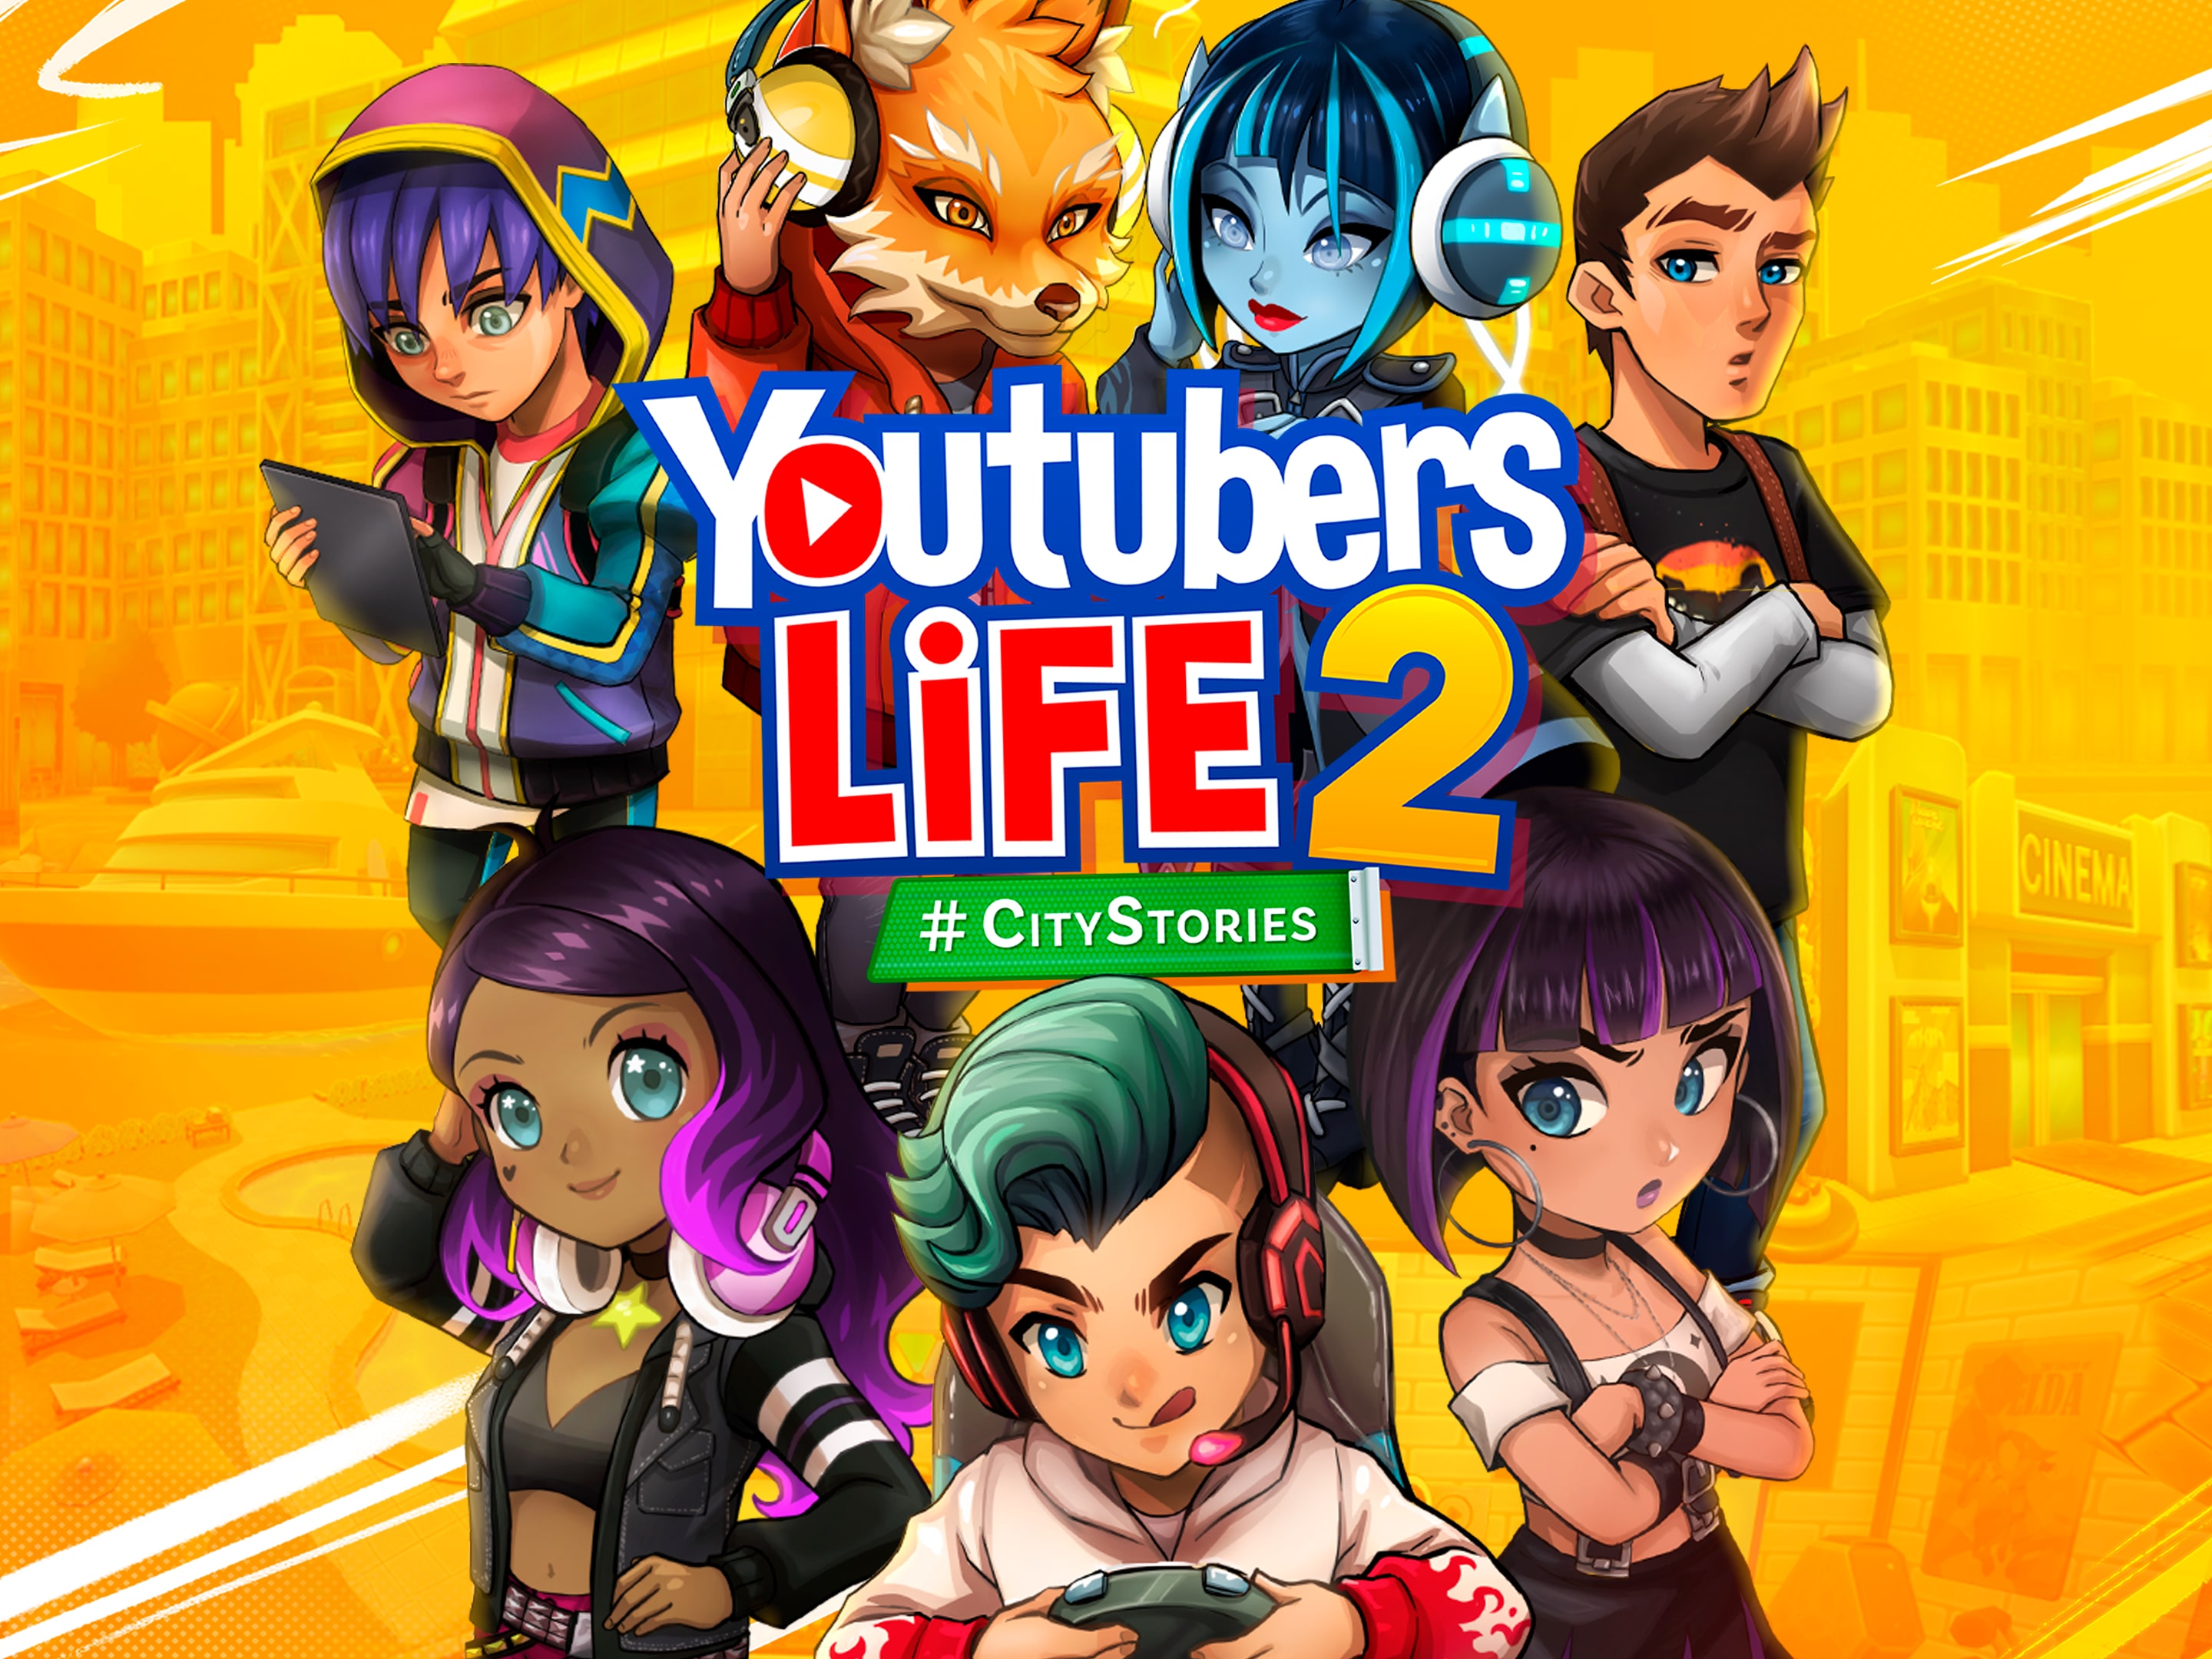  rs Life 2 (PS4) : Video Games